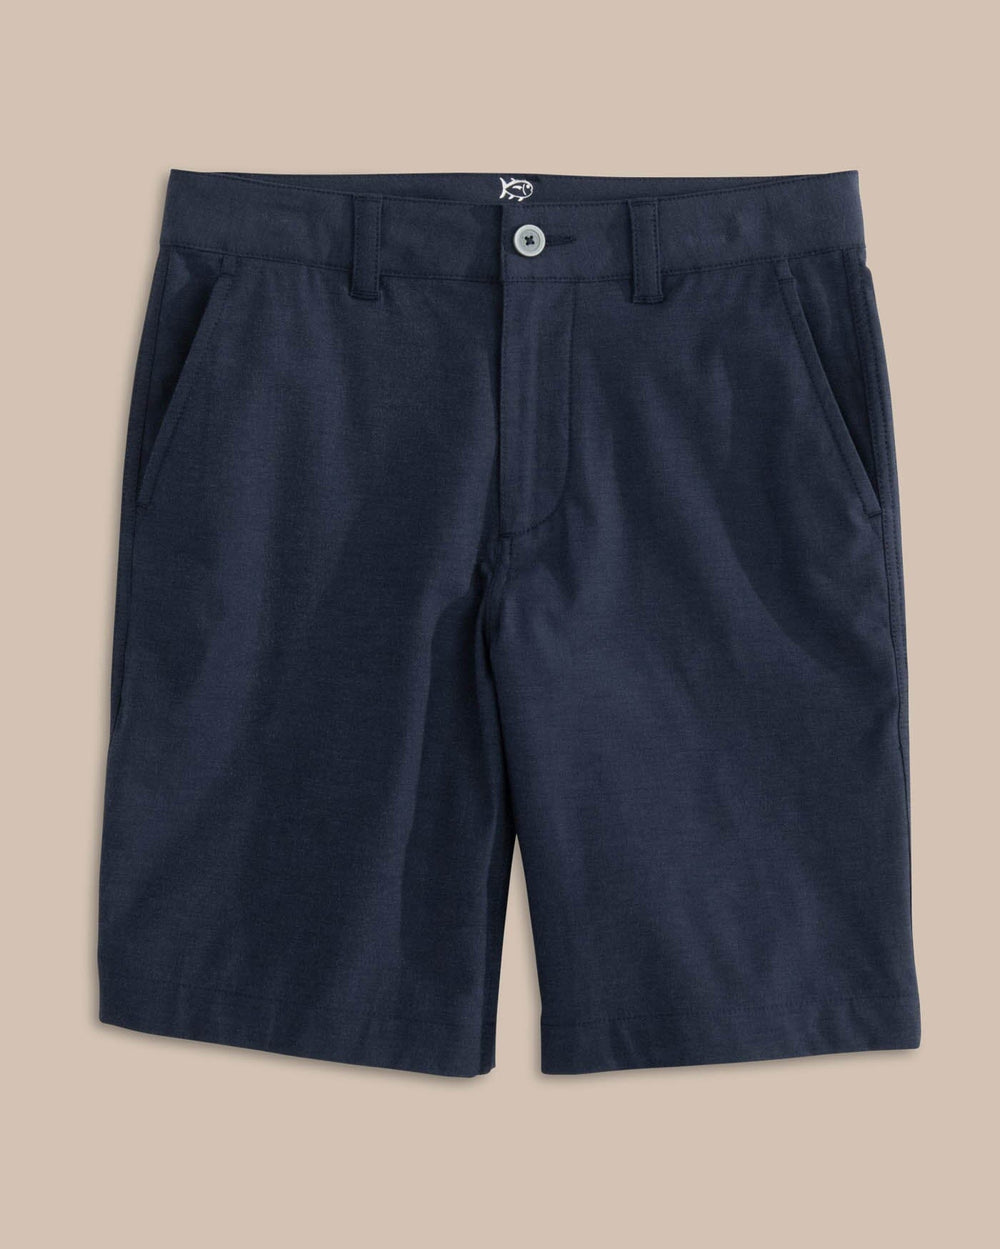 The front view of the Kid's Navy T3 Gulf Short by Southern Tide - True Navy